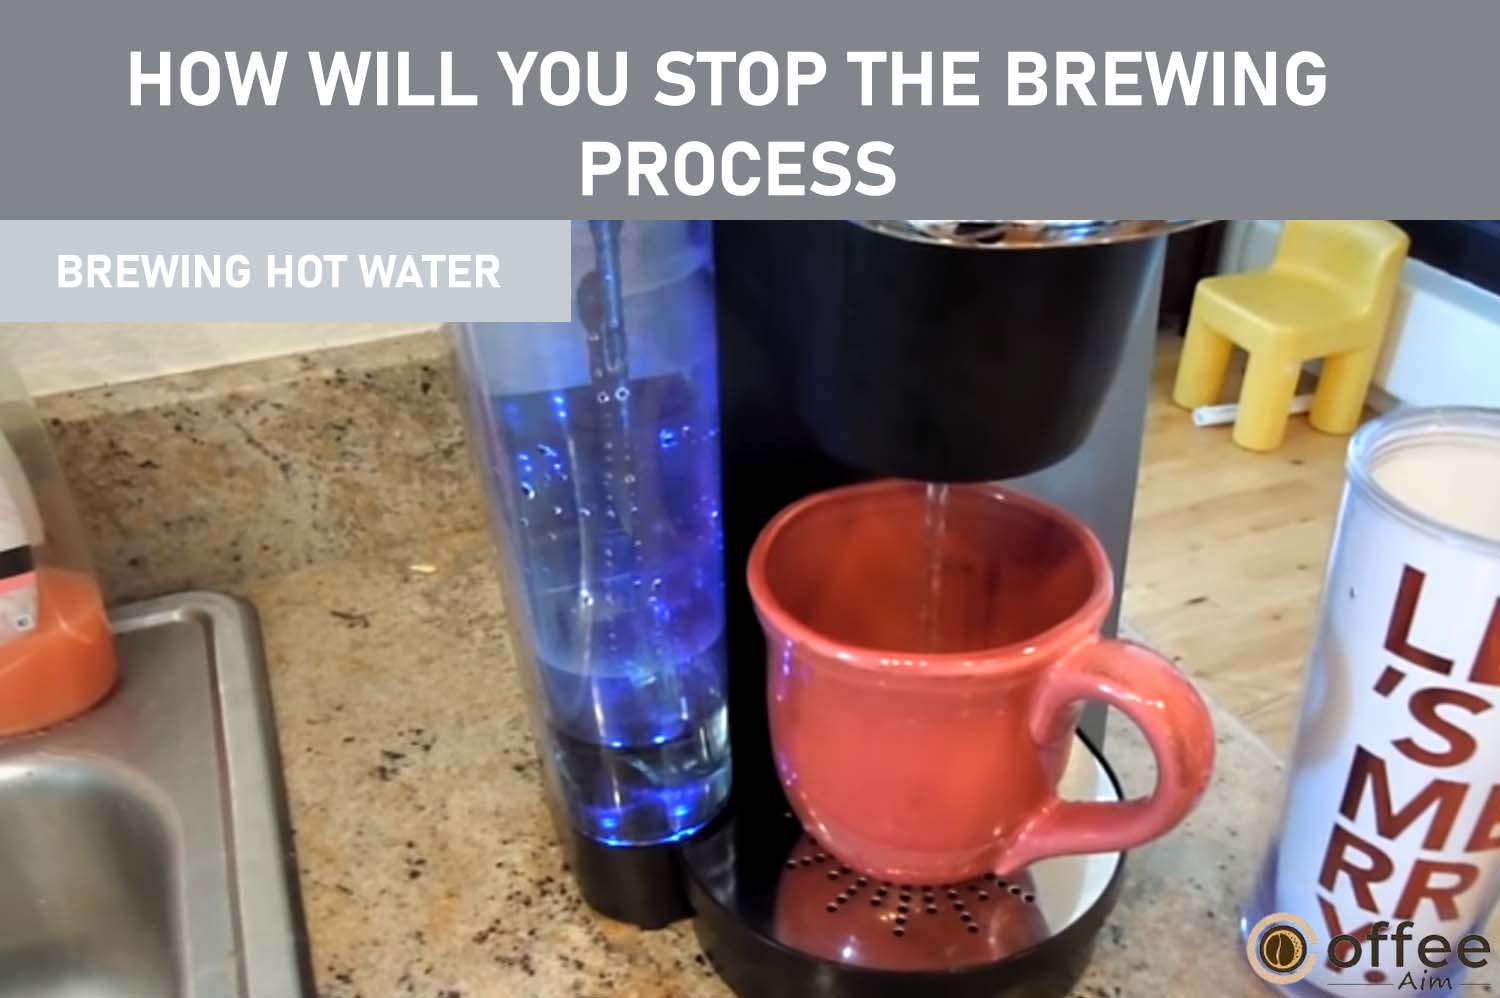 The Brewer can dispense hot water for various purposes, such as making hot cocoa, cooking, or soups. Simply follow the "Brew Your First Cup" instructions from the manual, excluding the K-Cup insertion.